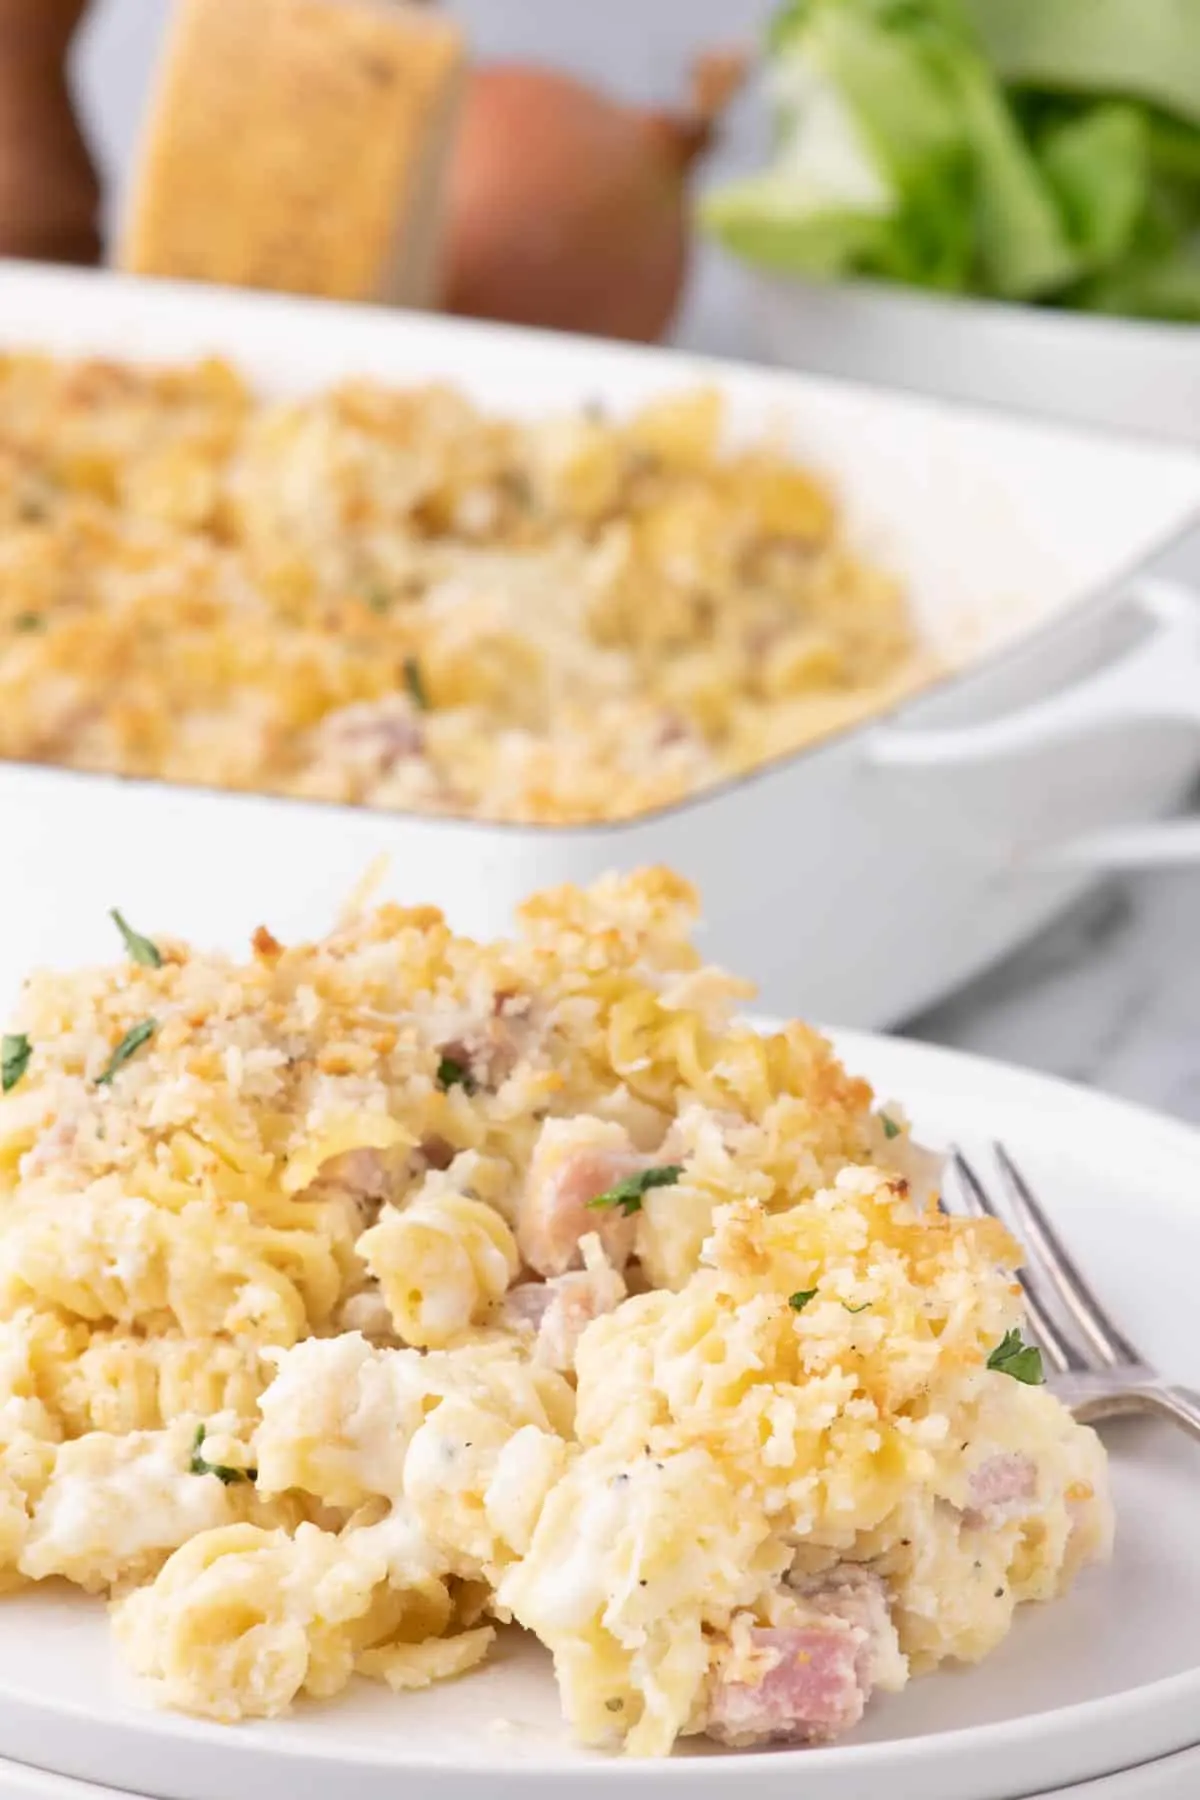 Ham and Noodle Casserole is a hearty casserole loaded with rotini pasta and diced ham all coated in a cheesy bubbling sauce under a parmesan coated panko crust.